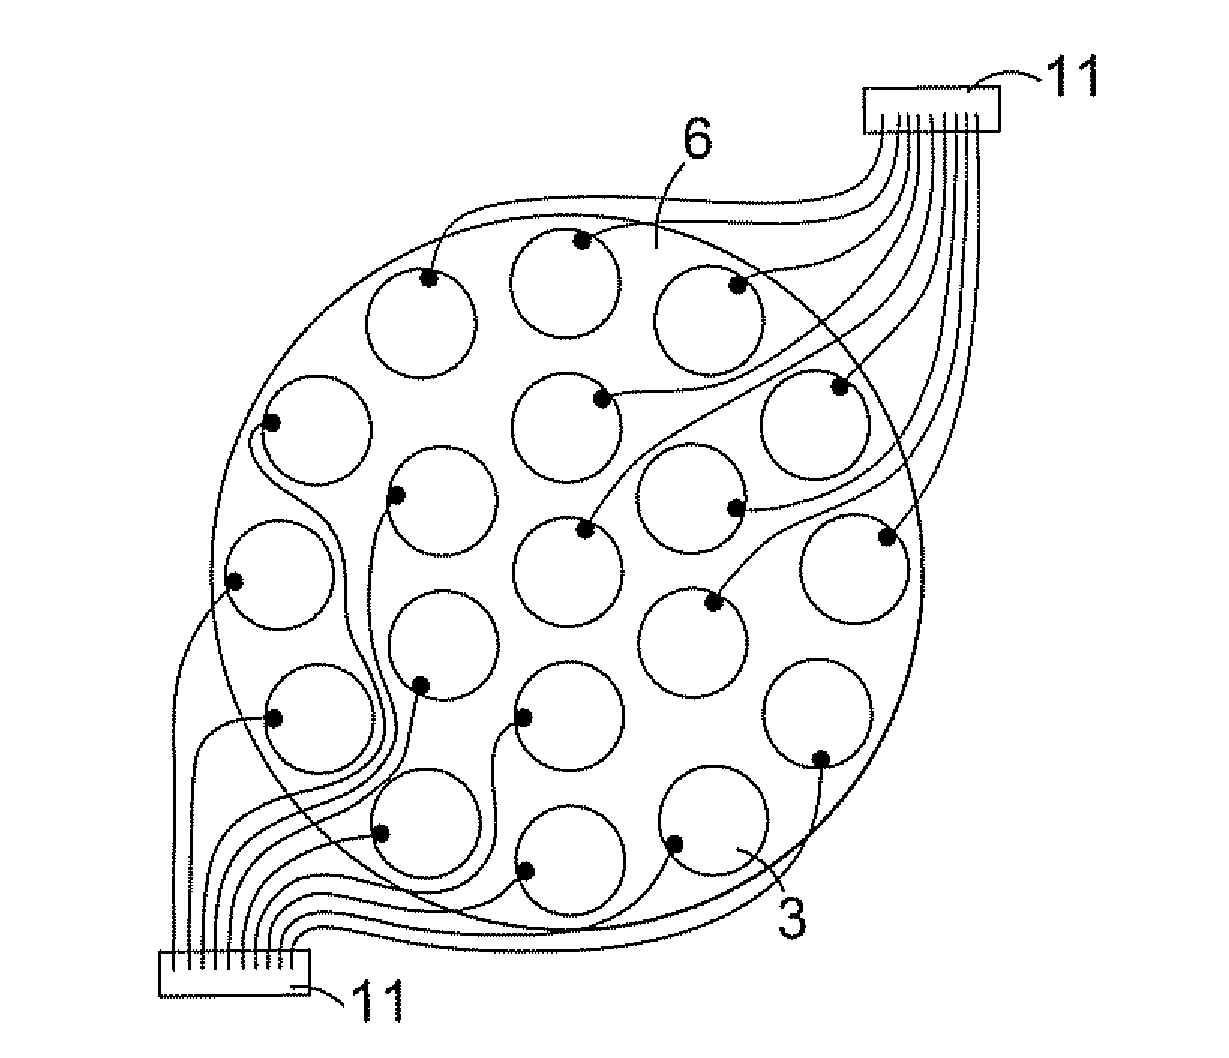 Apparatus for Treatment of Dermatological Conditions